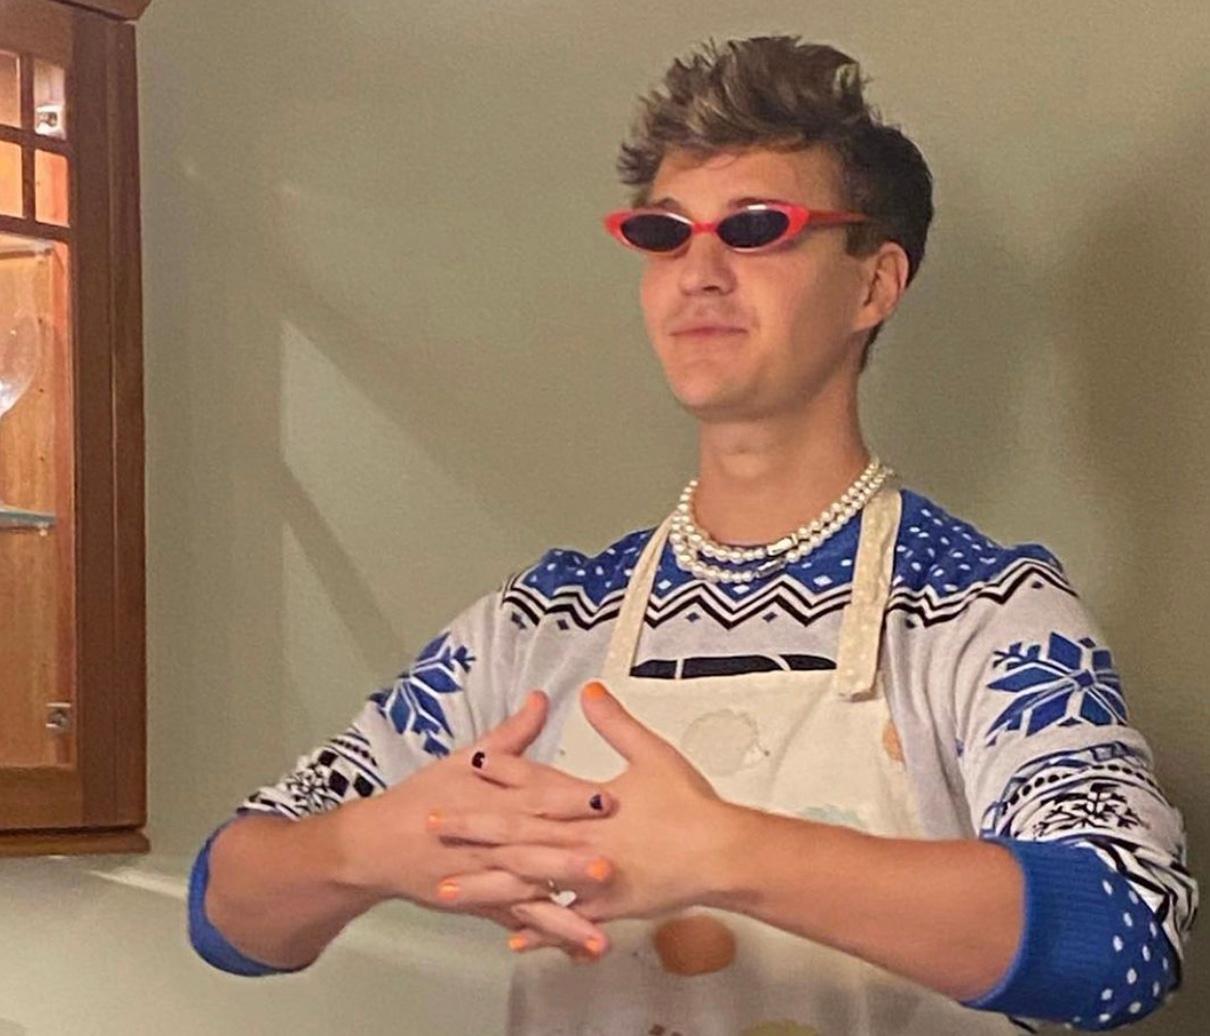 Why Was Ninja Banned From TikTok Live For This Viral Meme?